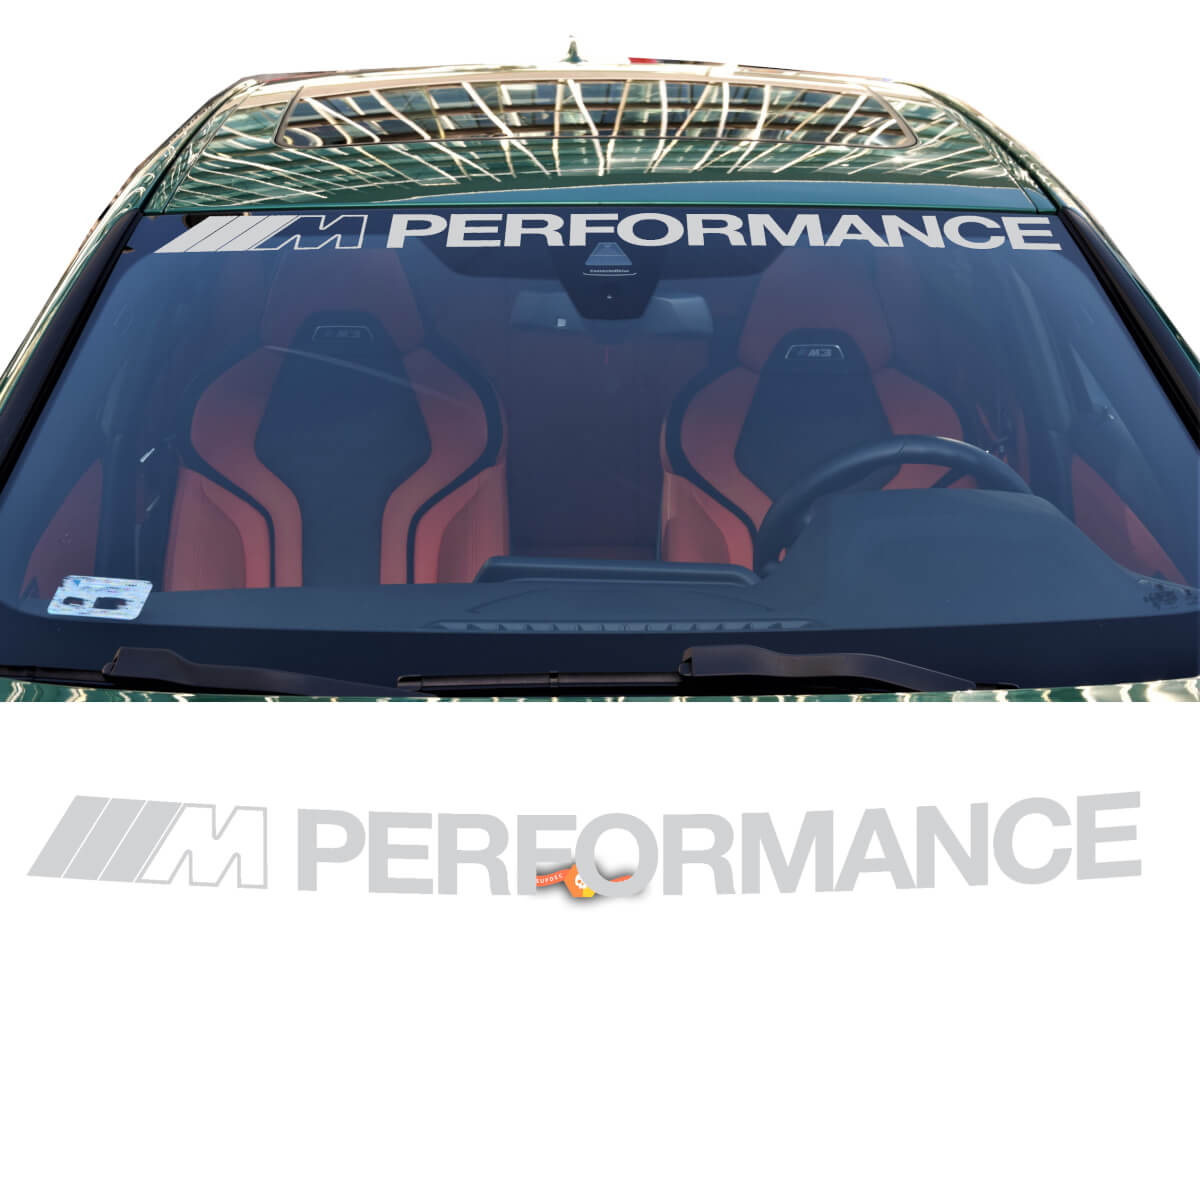 ///M Performance Decal Sticker for Windshield or Rear Window fit to BMW G series
